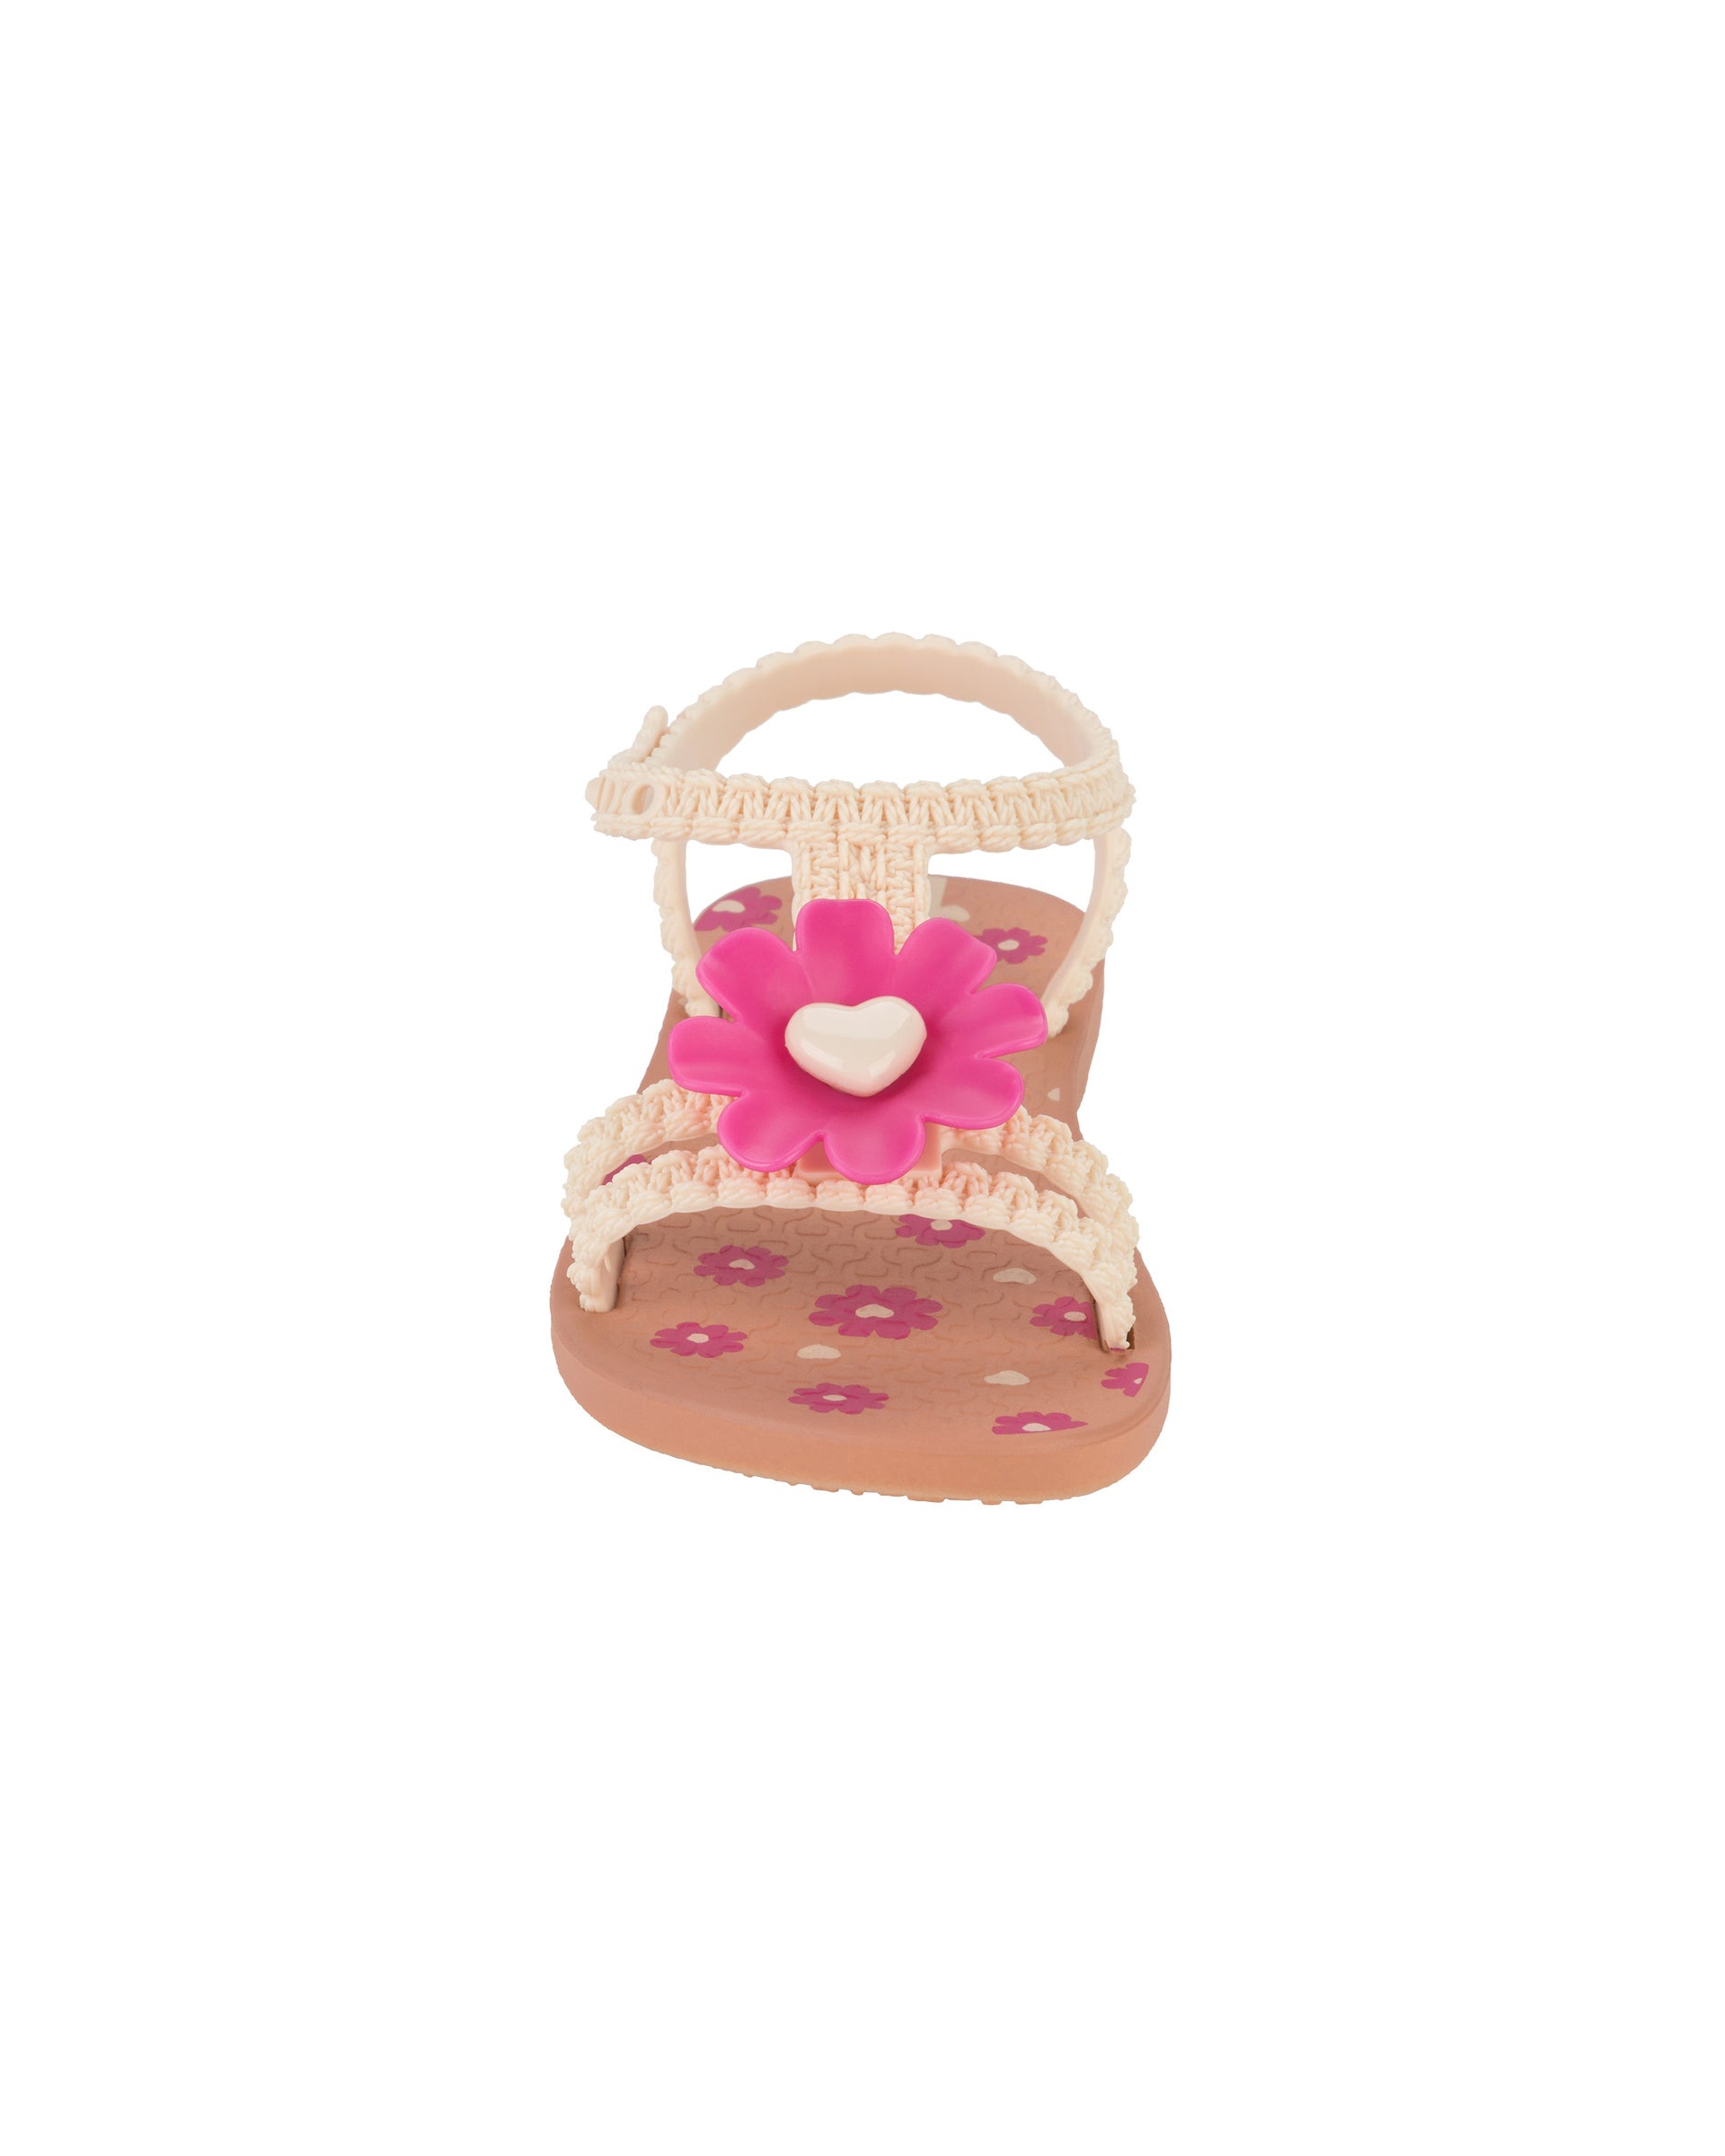 Front view of a pink Ipanema Daisy baby sandal with pink flower on top and crochet texture .